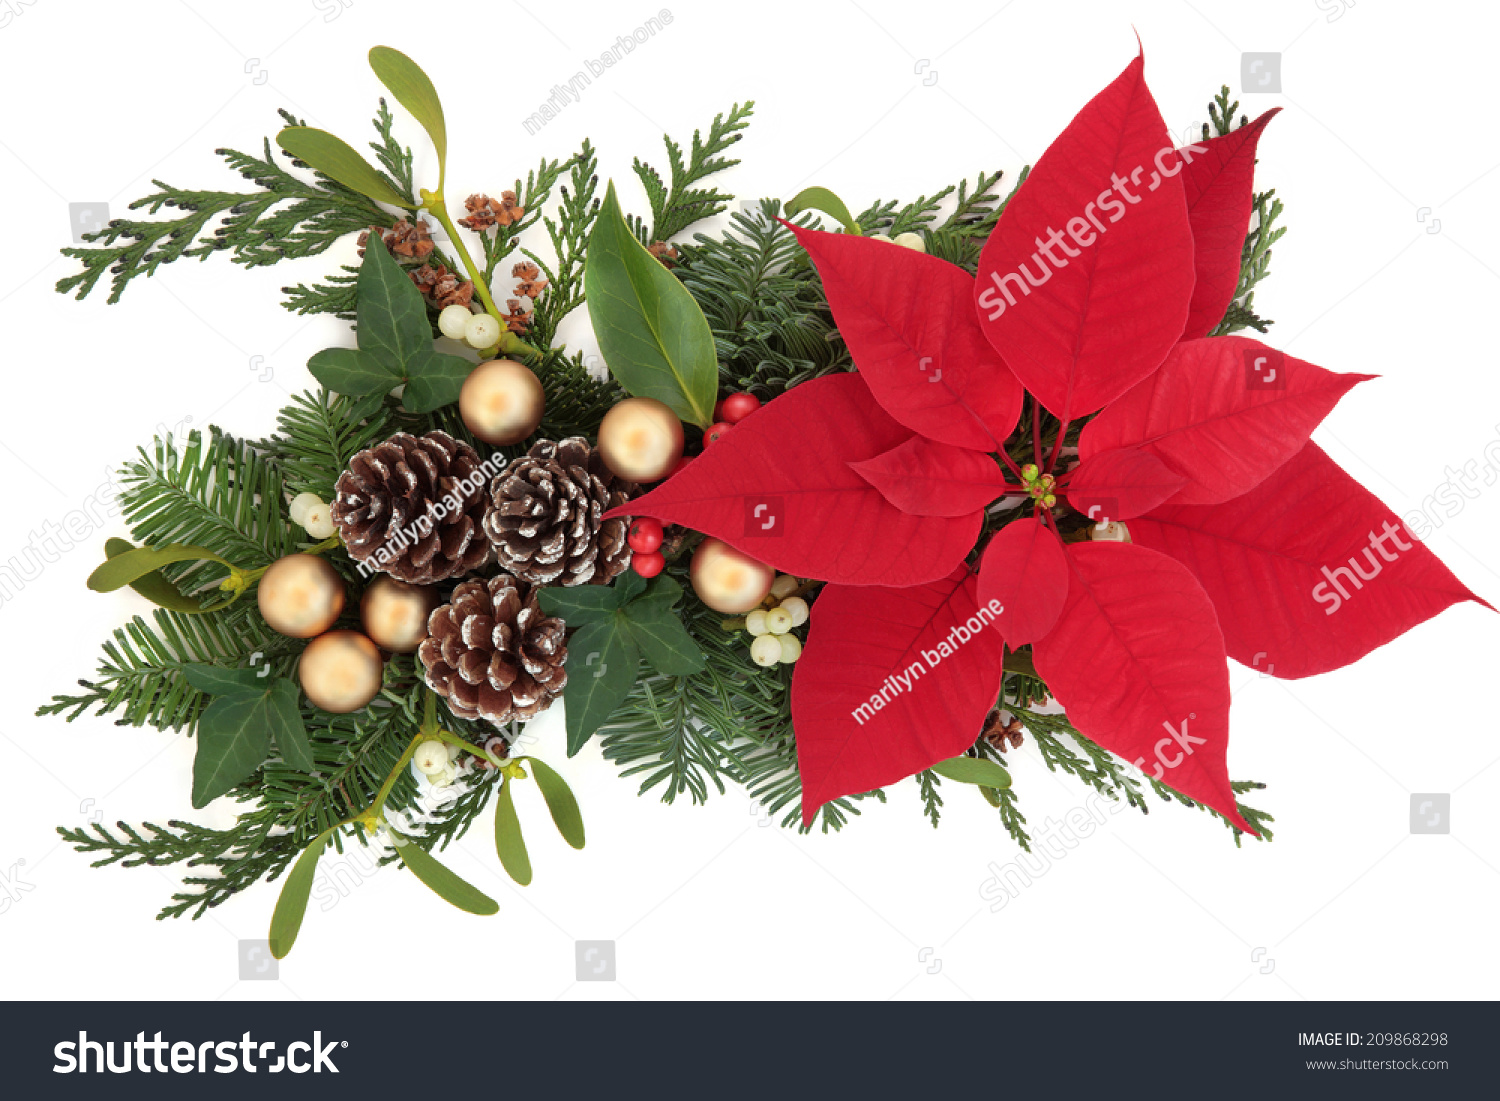 Poinsettia Flower Arrangement With Gold Bauble Decorations And Winter ...